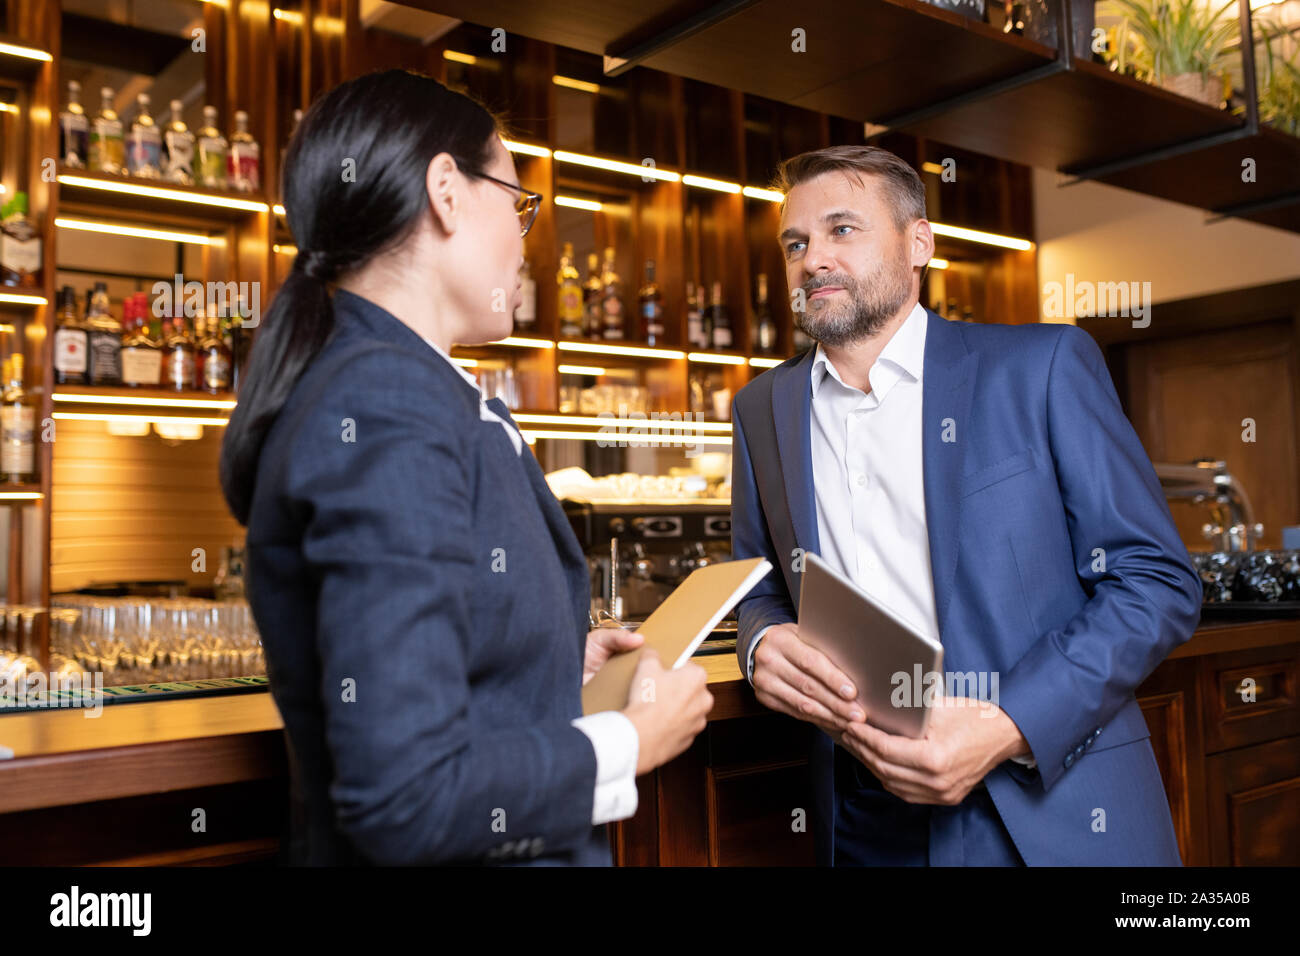 Two owners of luxurious restaurant interacting by bar counter Stock Photo